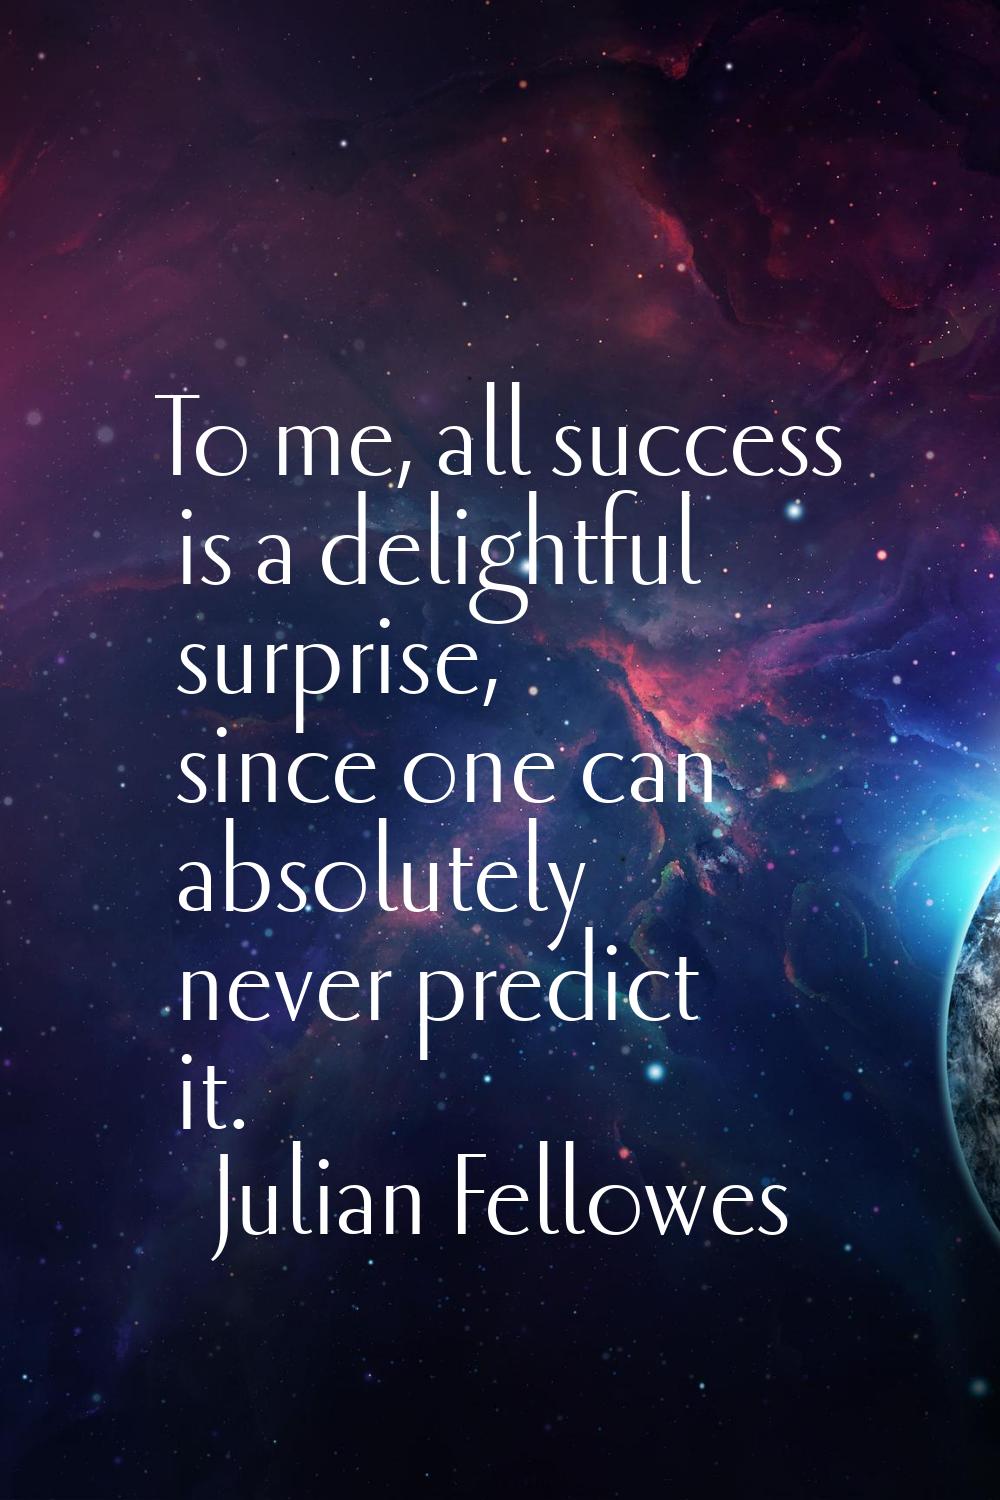 To me, all success is a delightful surprise, since one can absolutely never predict it.